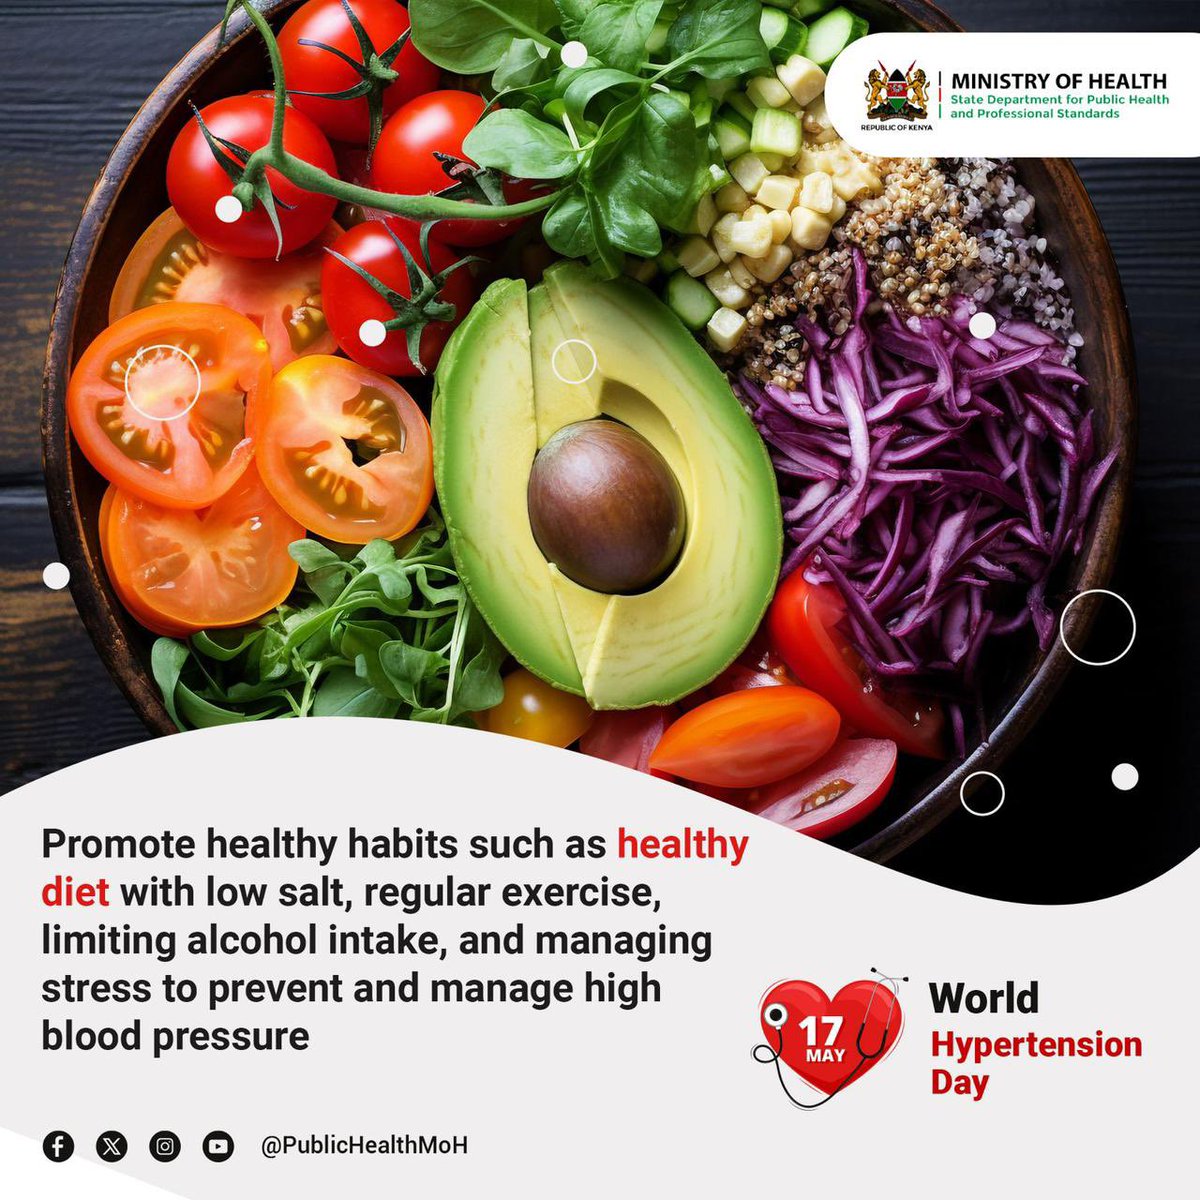 Small changes, big impact: Simple lifestyle modifications like eating a balanced diet, staying physically active, and managing stress can help lower blood pressure. #WorldHypertensionDay